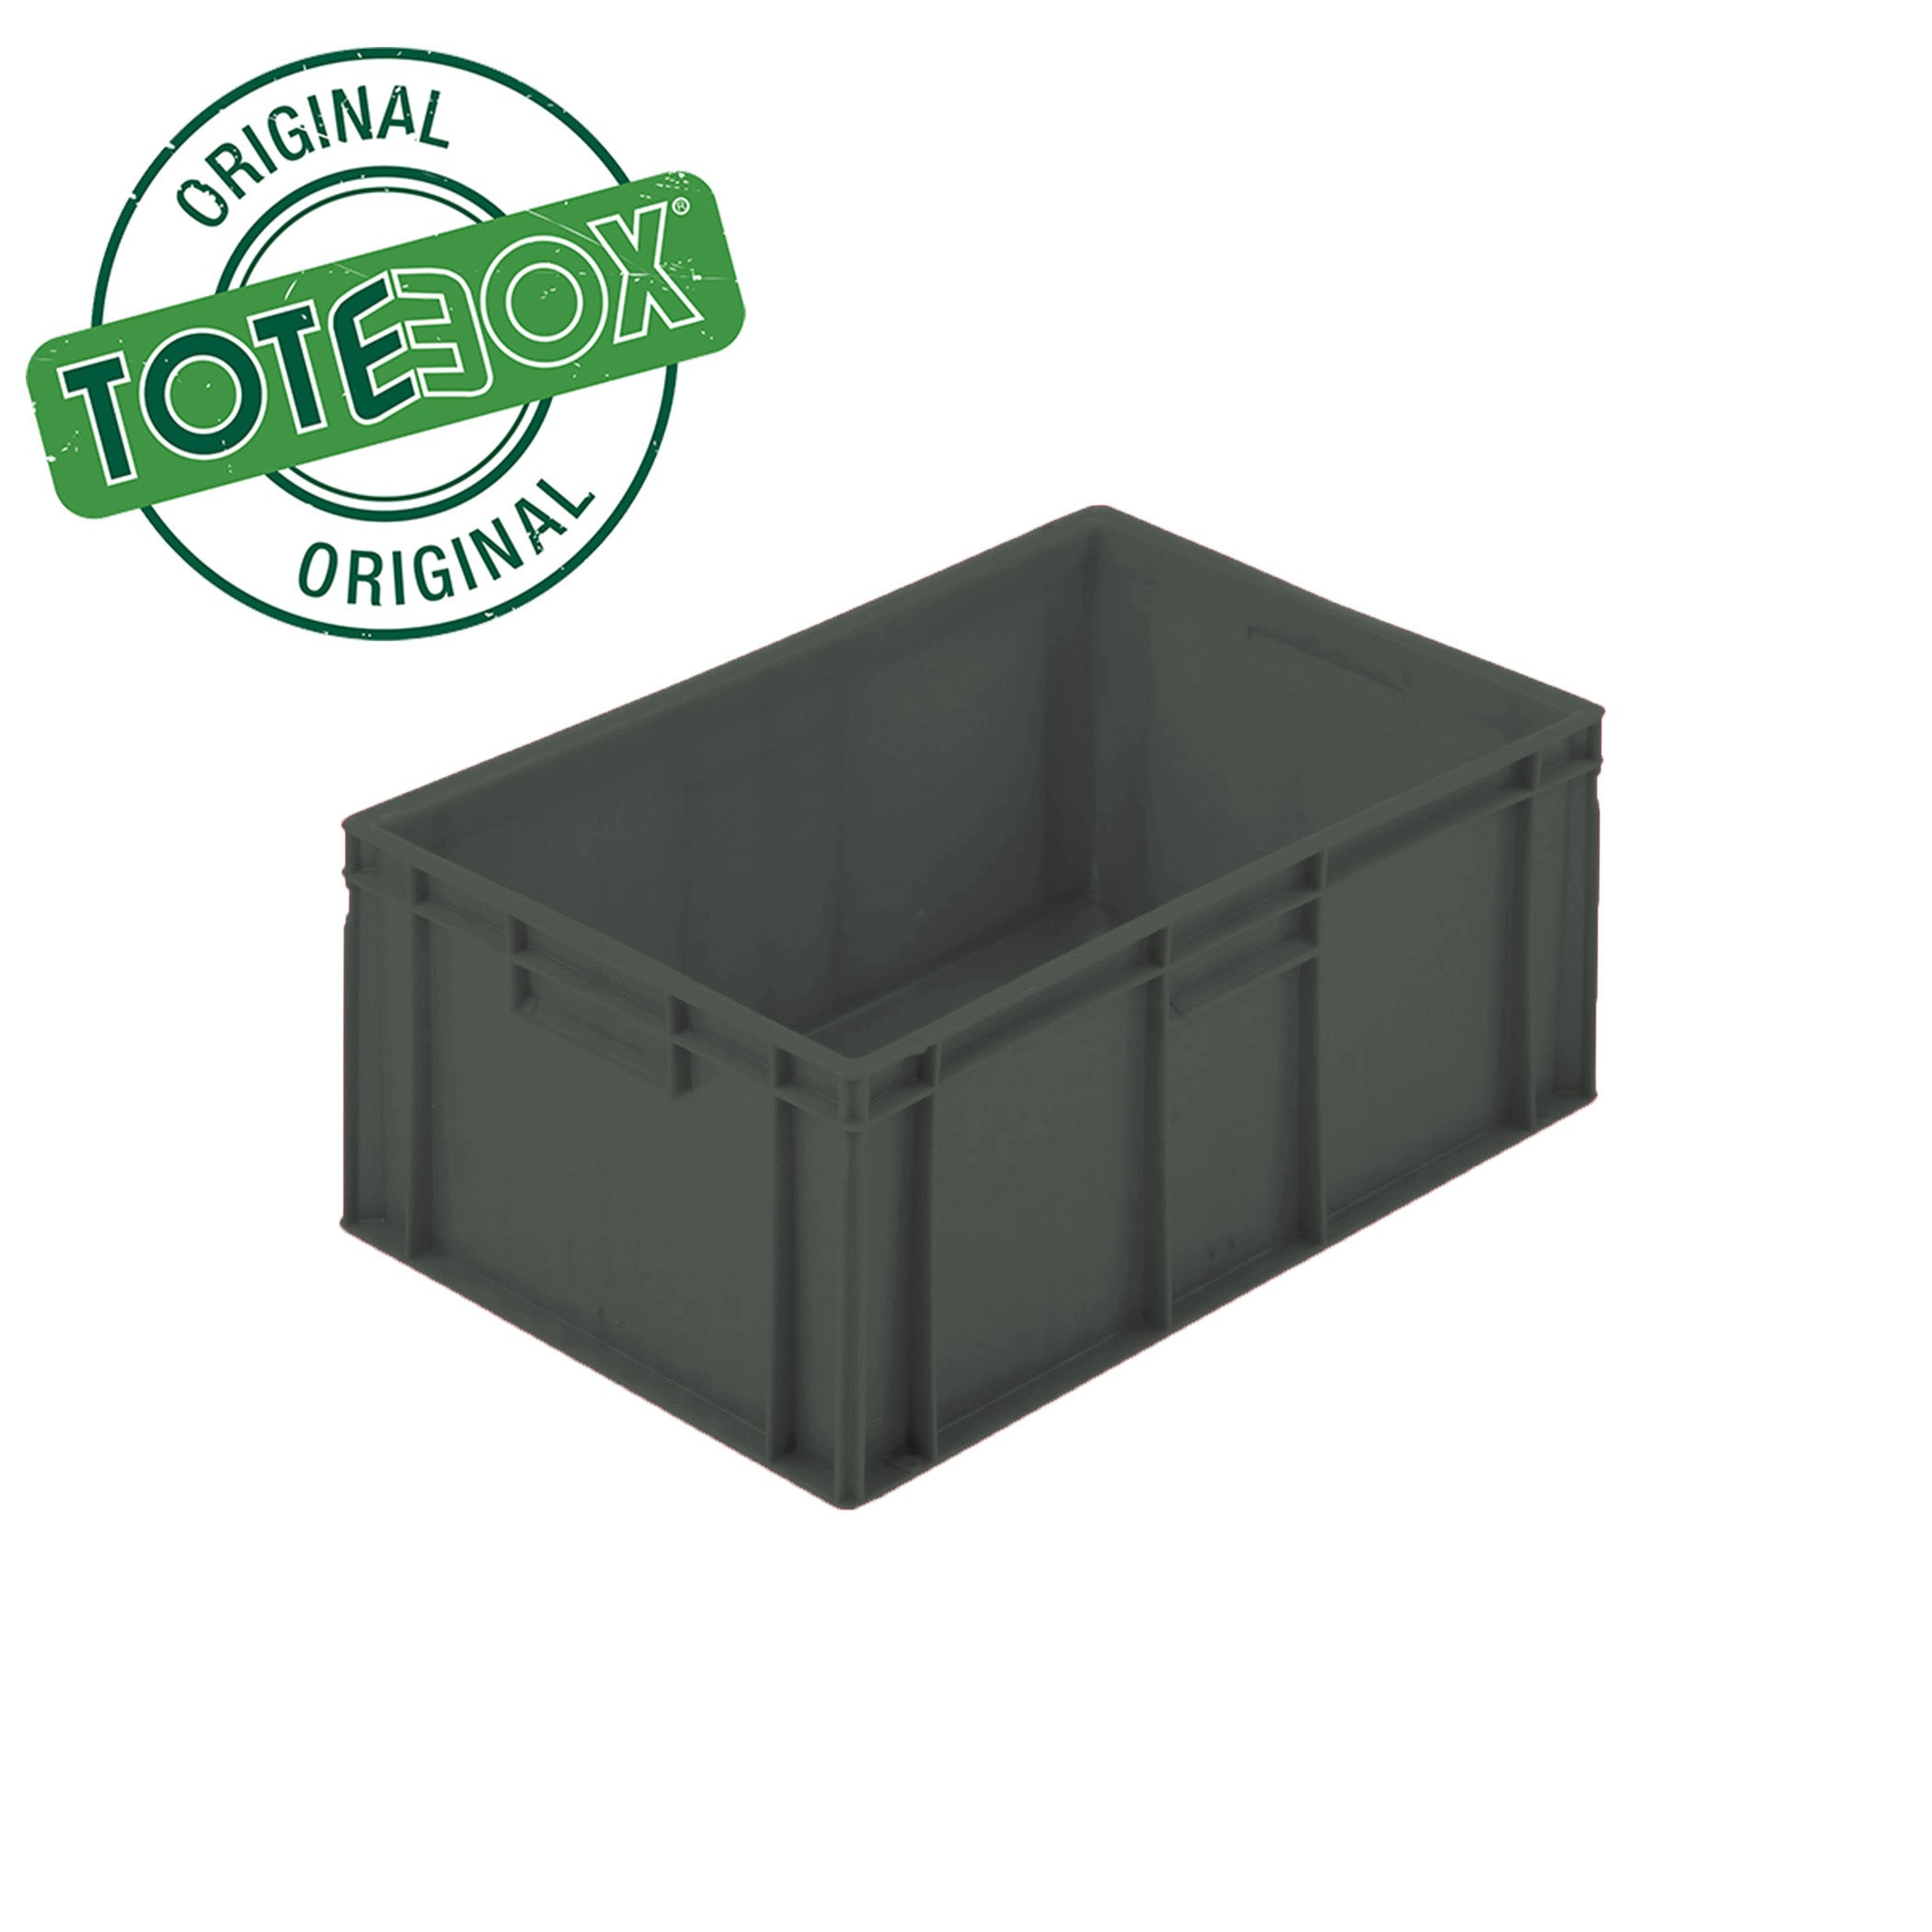 *Bundle of 10* 45L Original Totebox Euro Stacking Container (600x400x230mm)